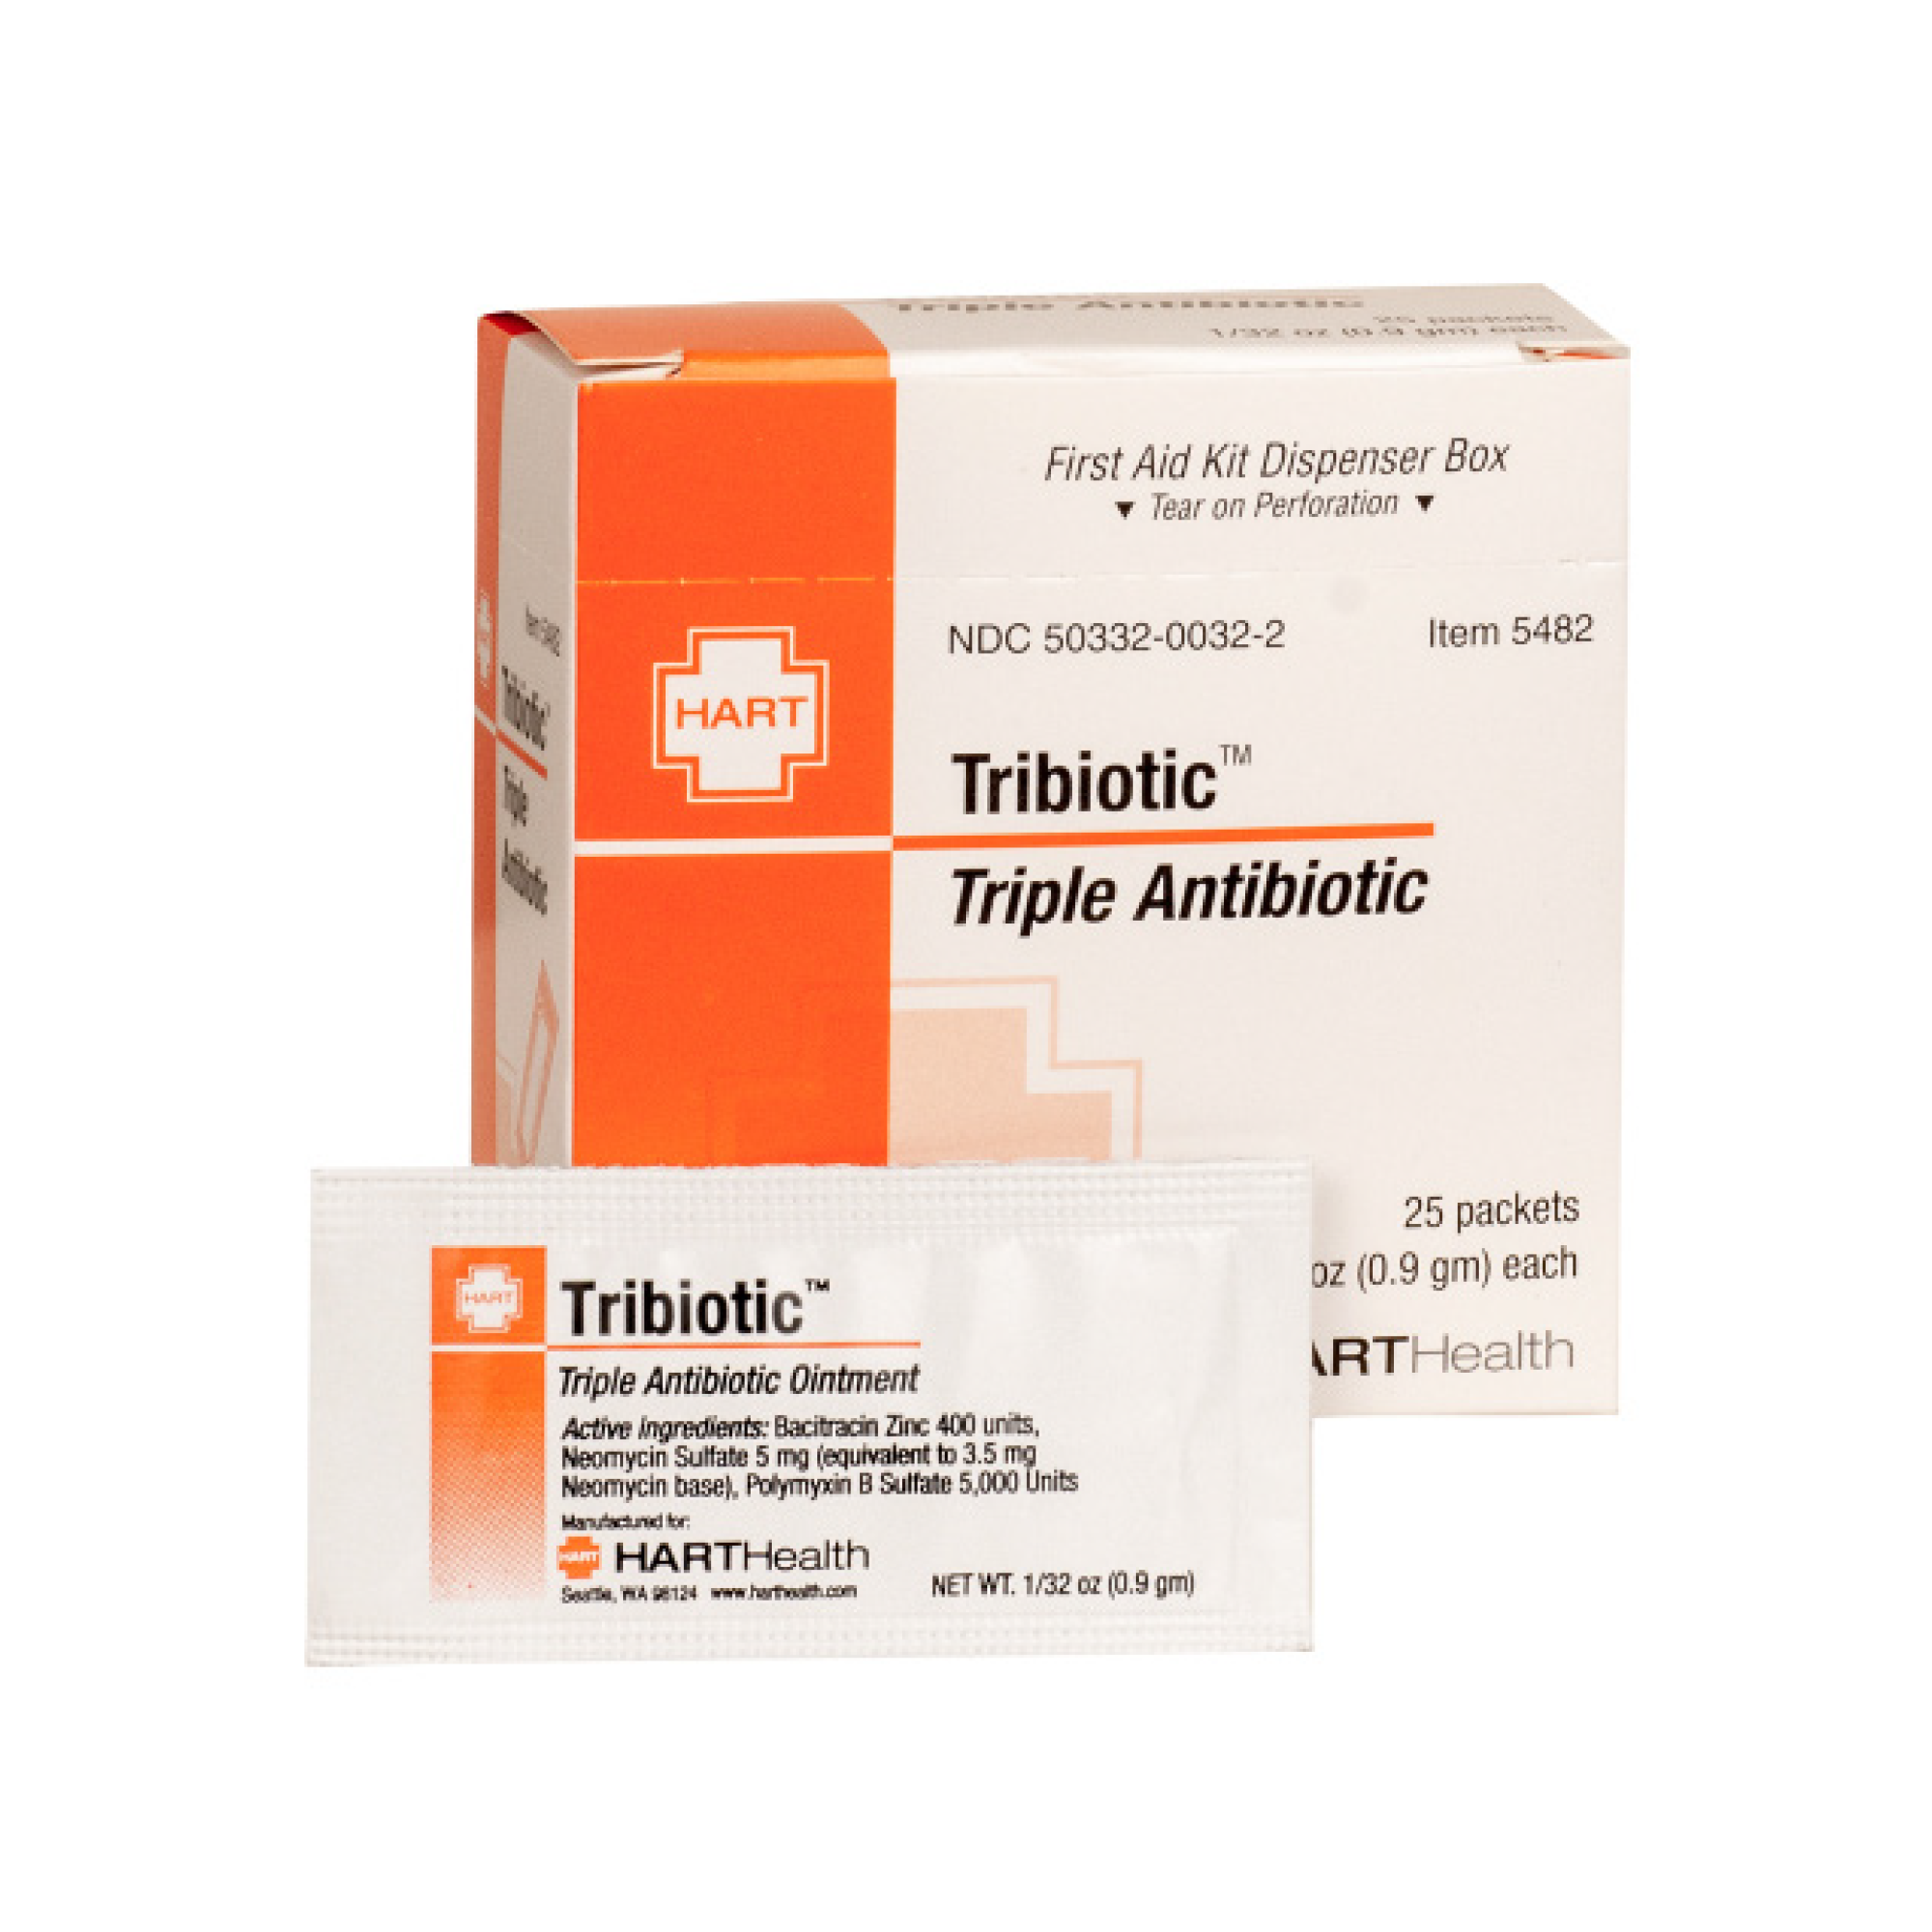 TRIBIOTIC ointment